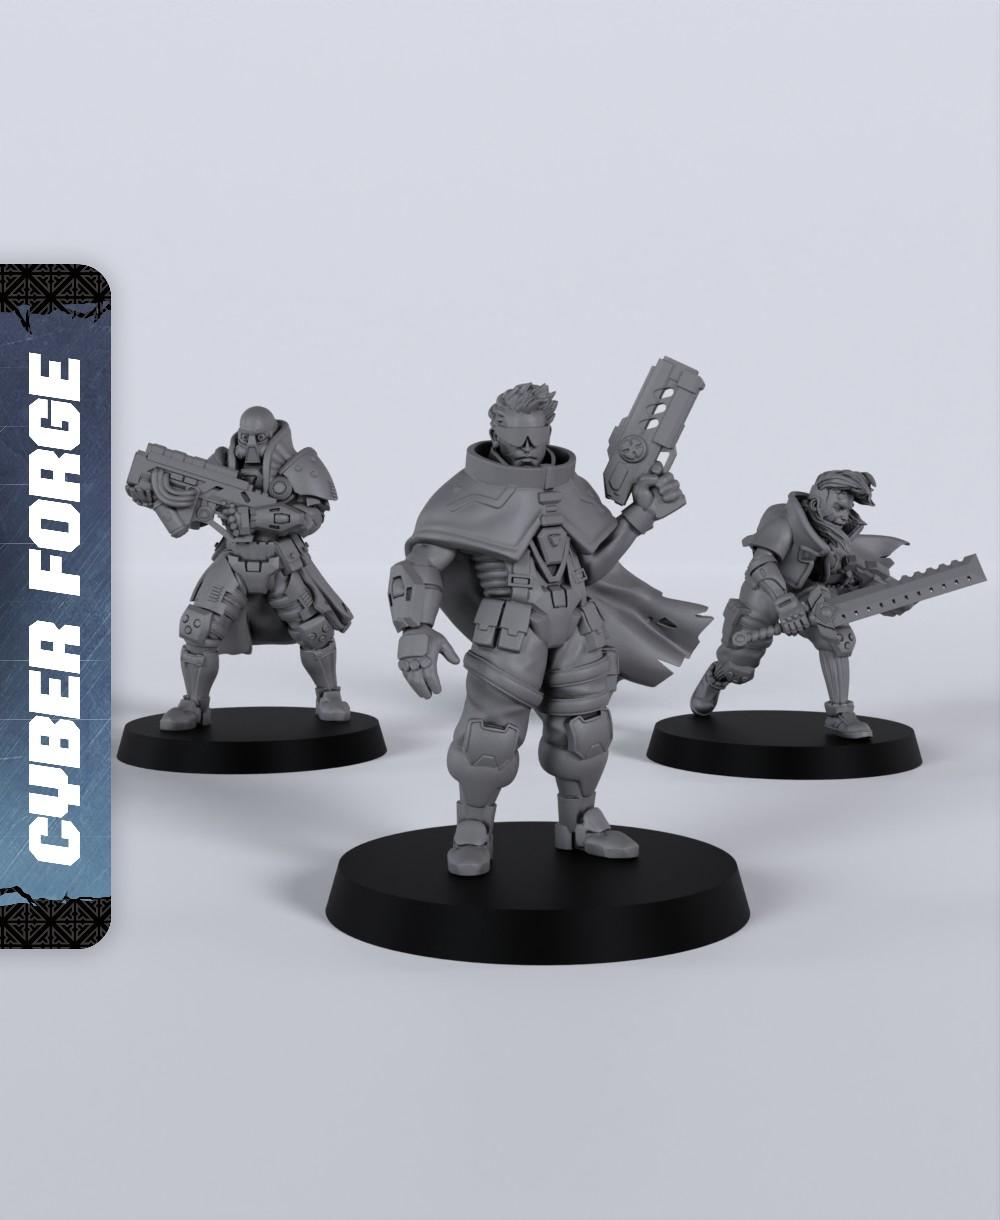 FPFH Heroes - With Free Cyberpunk Warhammer - 40k Sci-Fi Gift Ideas for RPG and Wargamers 3d model